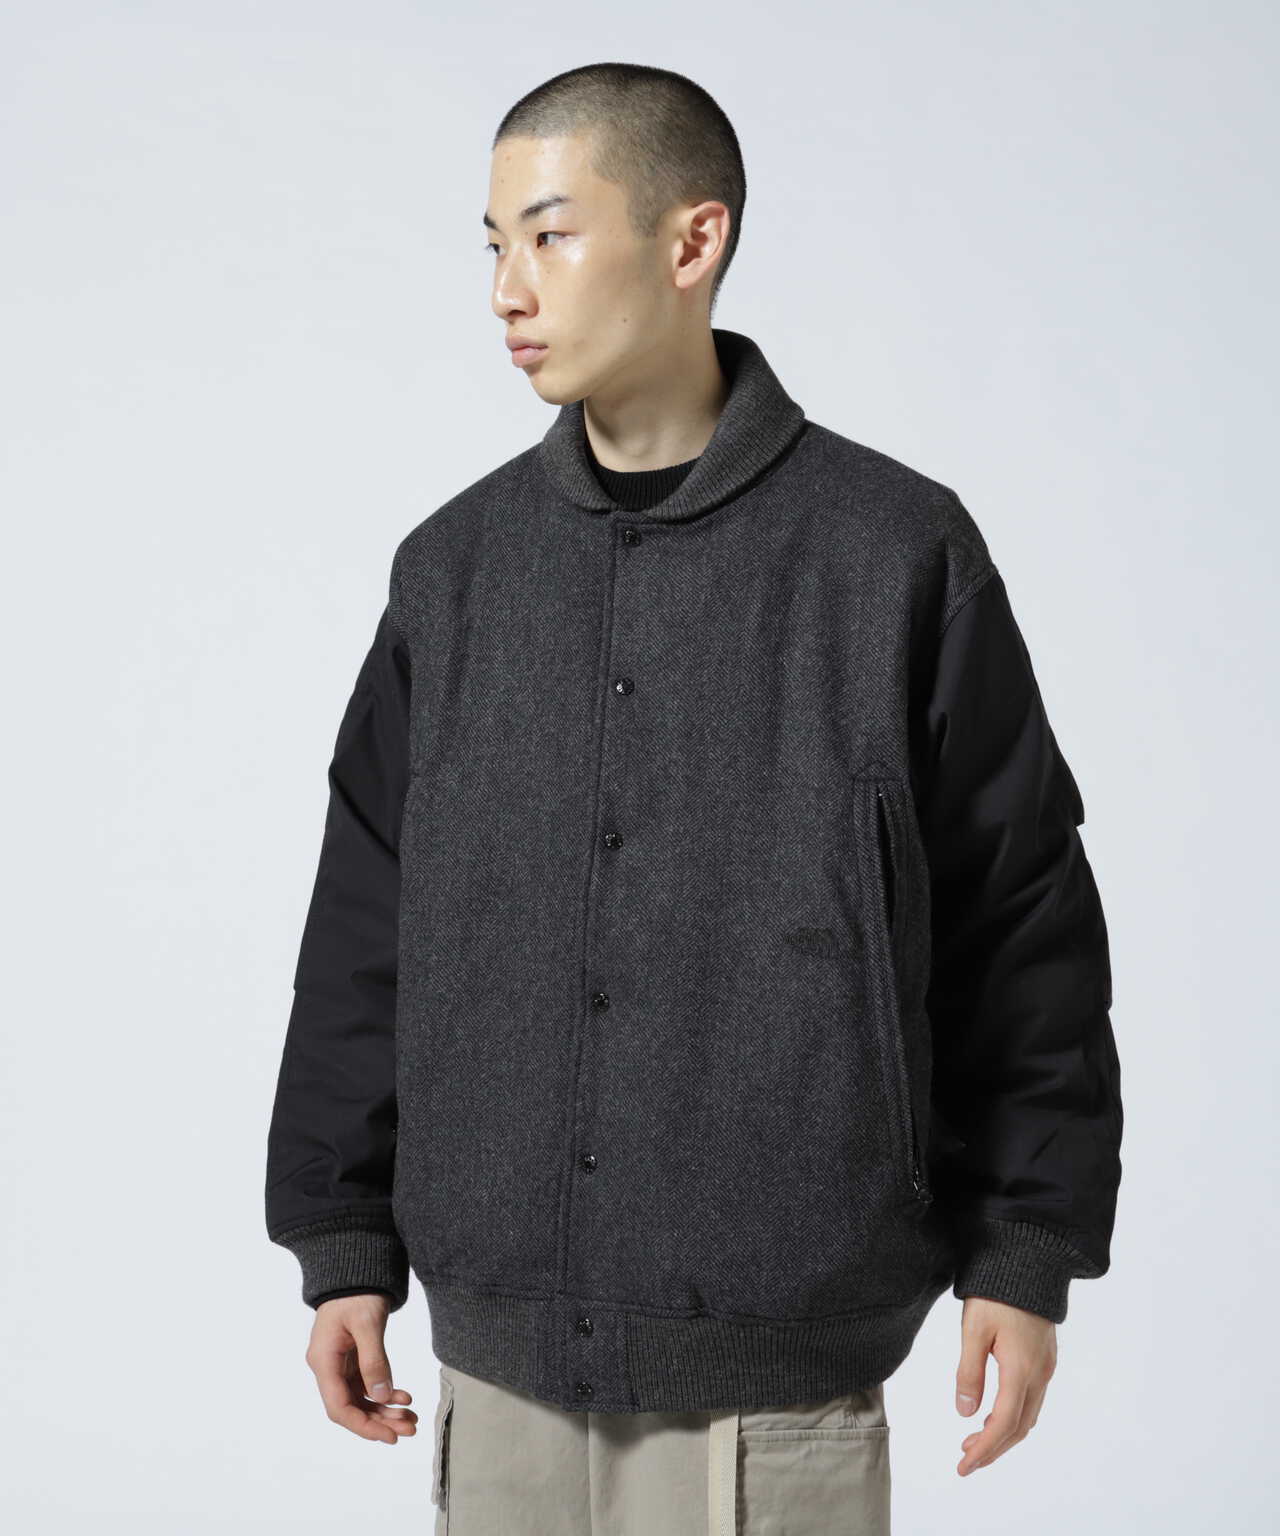 THE NORTH FACE PURPLE LABEL Jacket